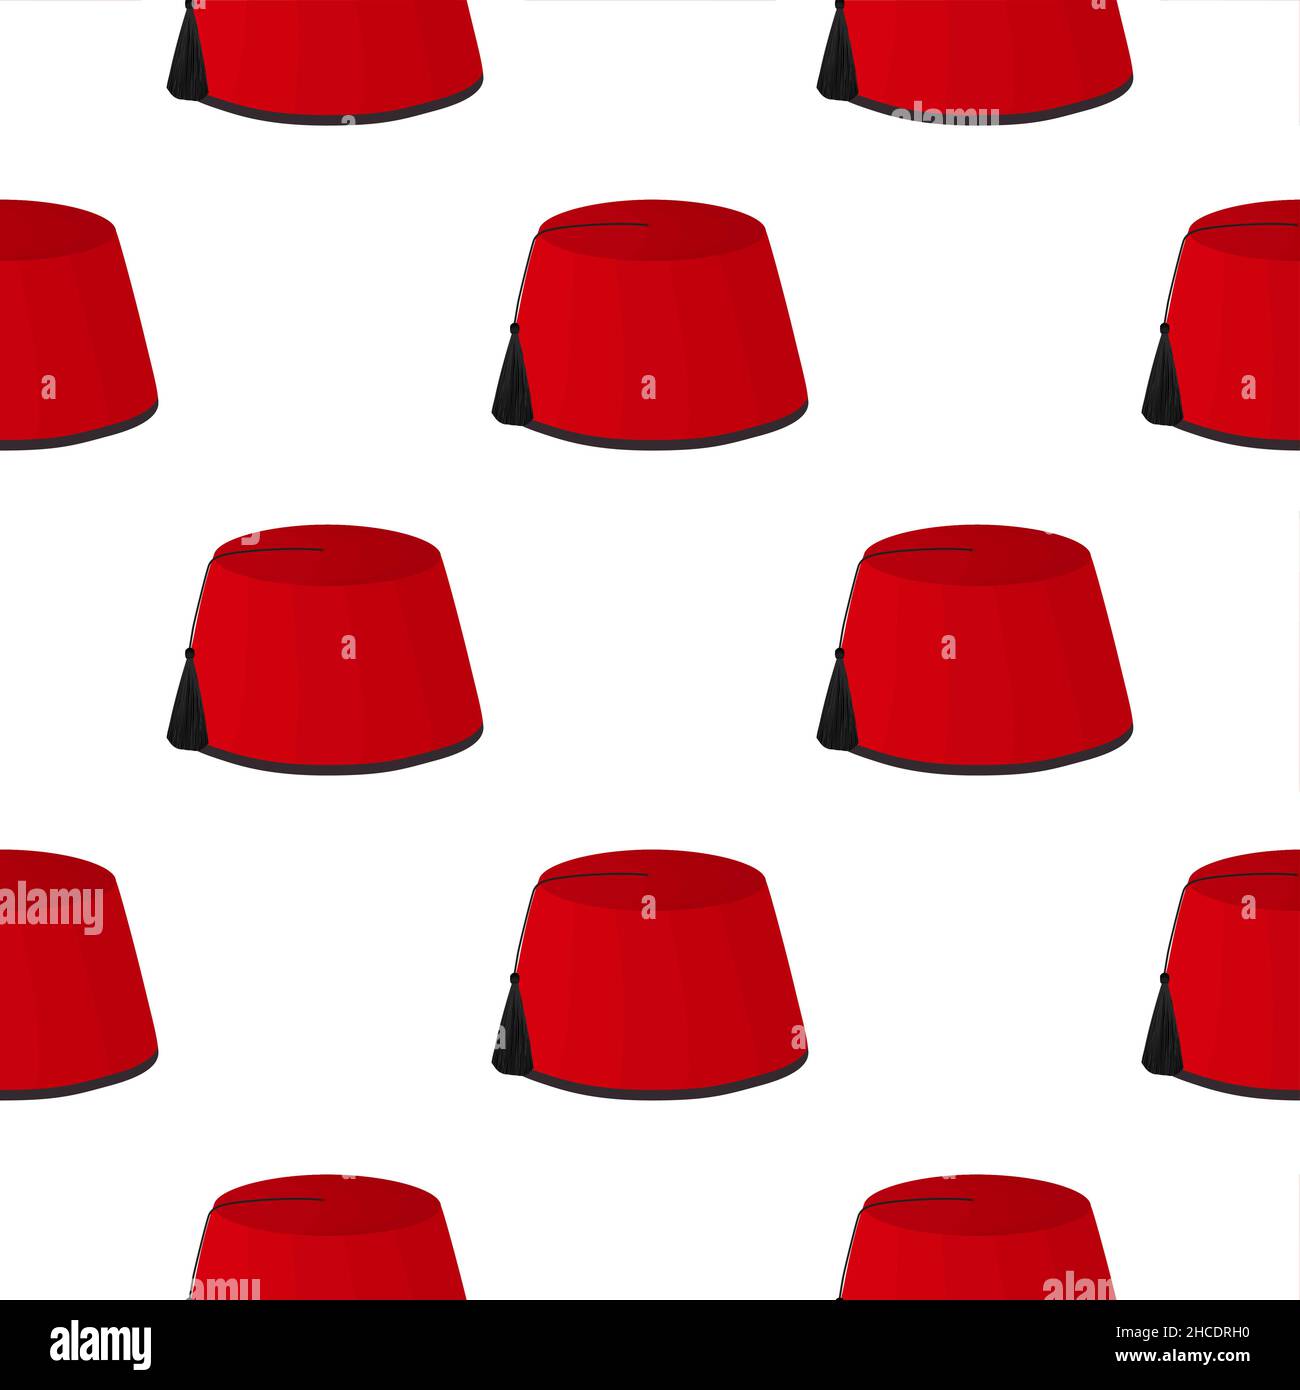 Illustration on theme pattern hats ottoman fez, beautiful caps in white background. Caps pattern consisting of collection hats ottoman fez for wearing Stock Vector